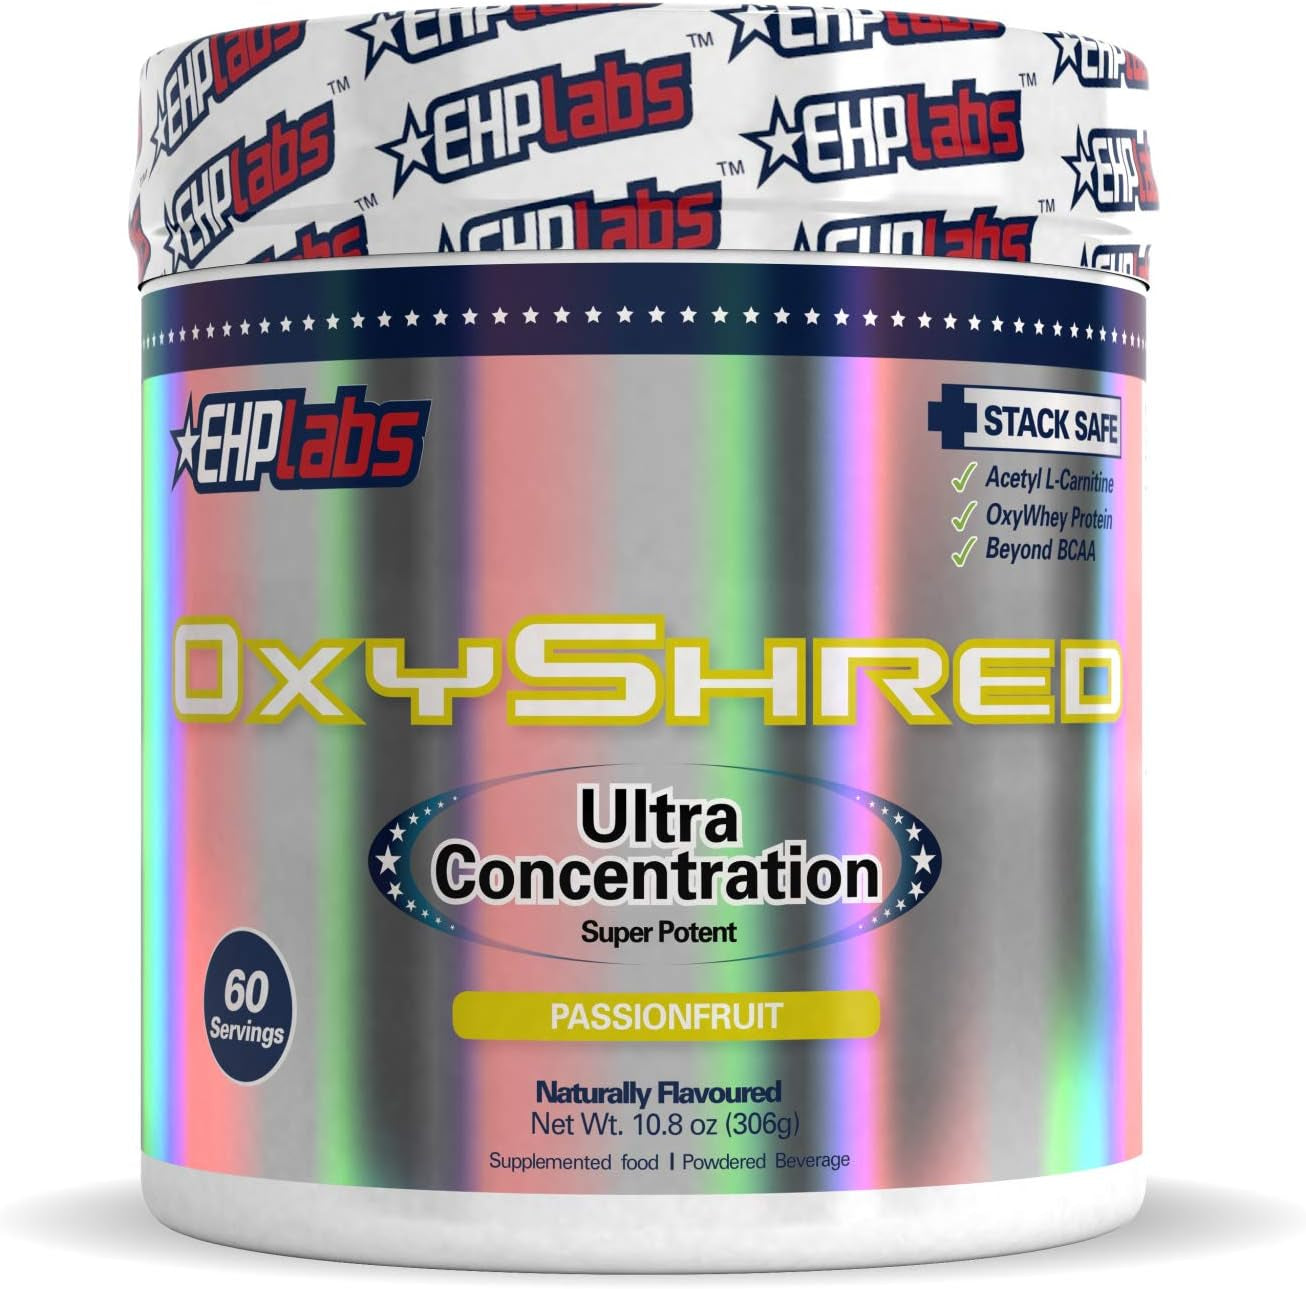 ELABS Oxyshred Acetyl L Carntine Oxy Shred Fat Burner - Passionfruit